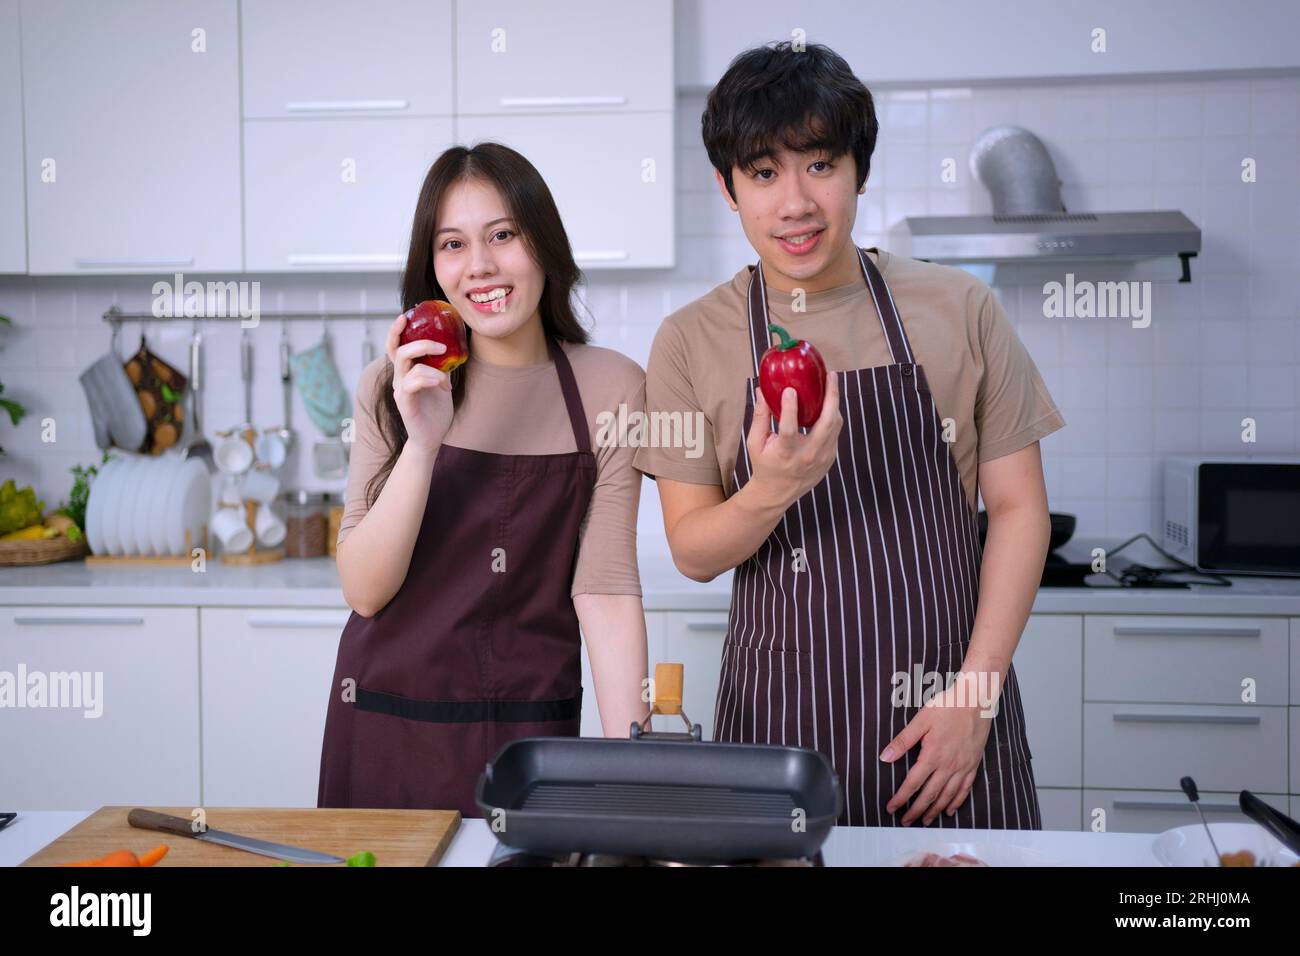 Young couple is livestreaming in kitchen. Lifestyle and leisure activity concept. Stock Photo